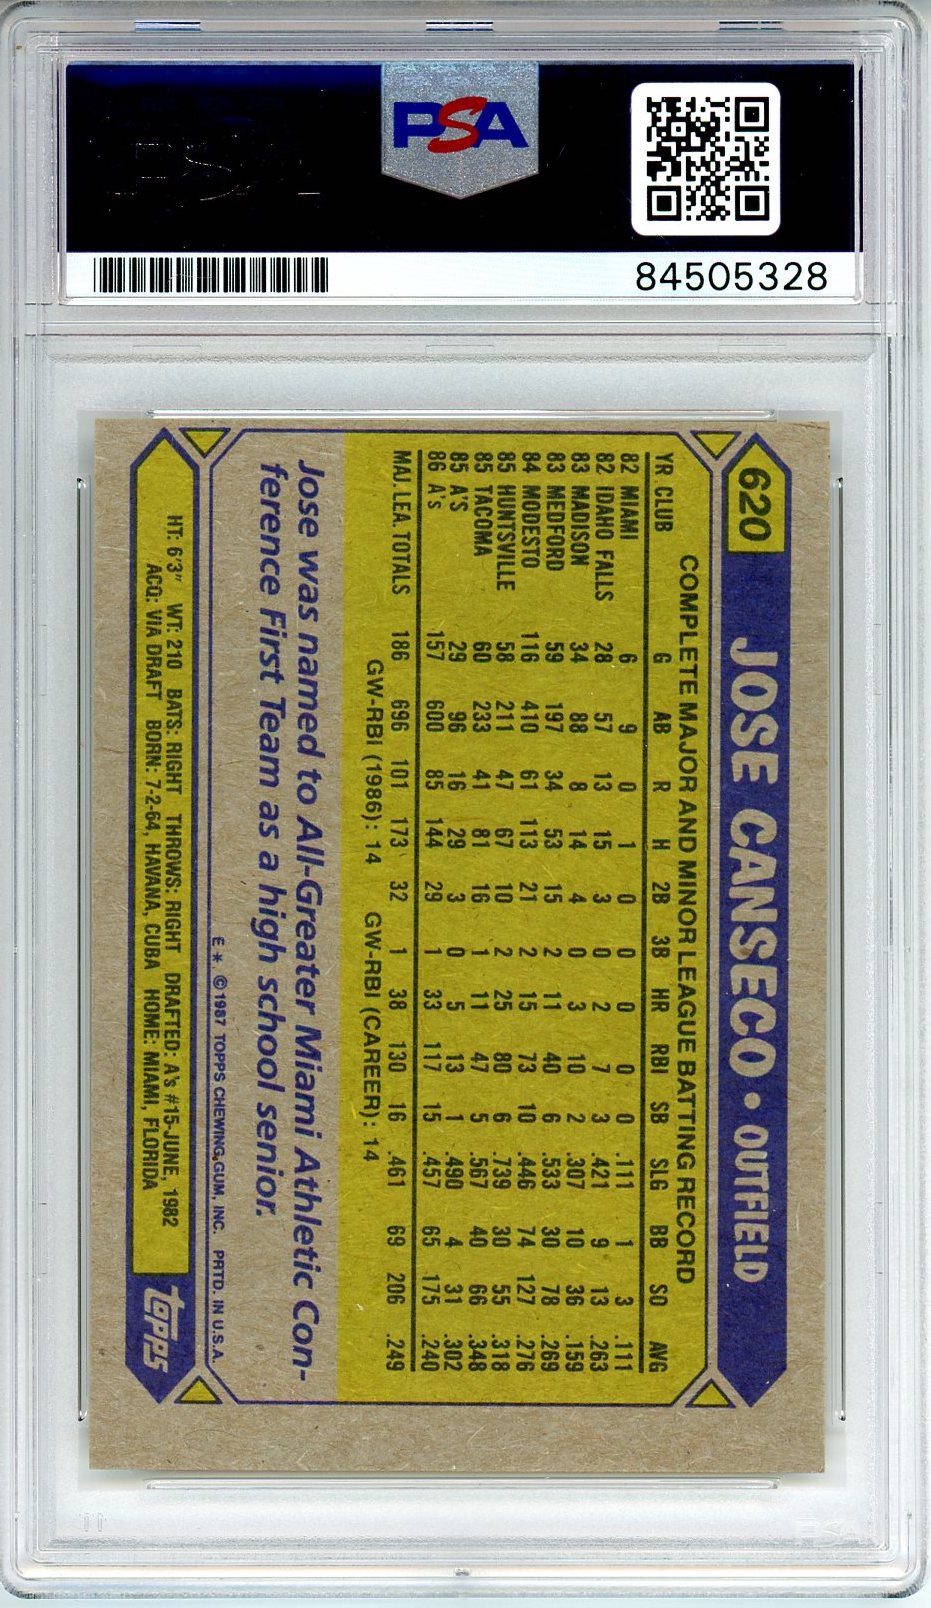 1987 TOPPS JOSE CANSECO AUTO RC ROOKIE #620 PSA DNA (328)